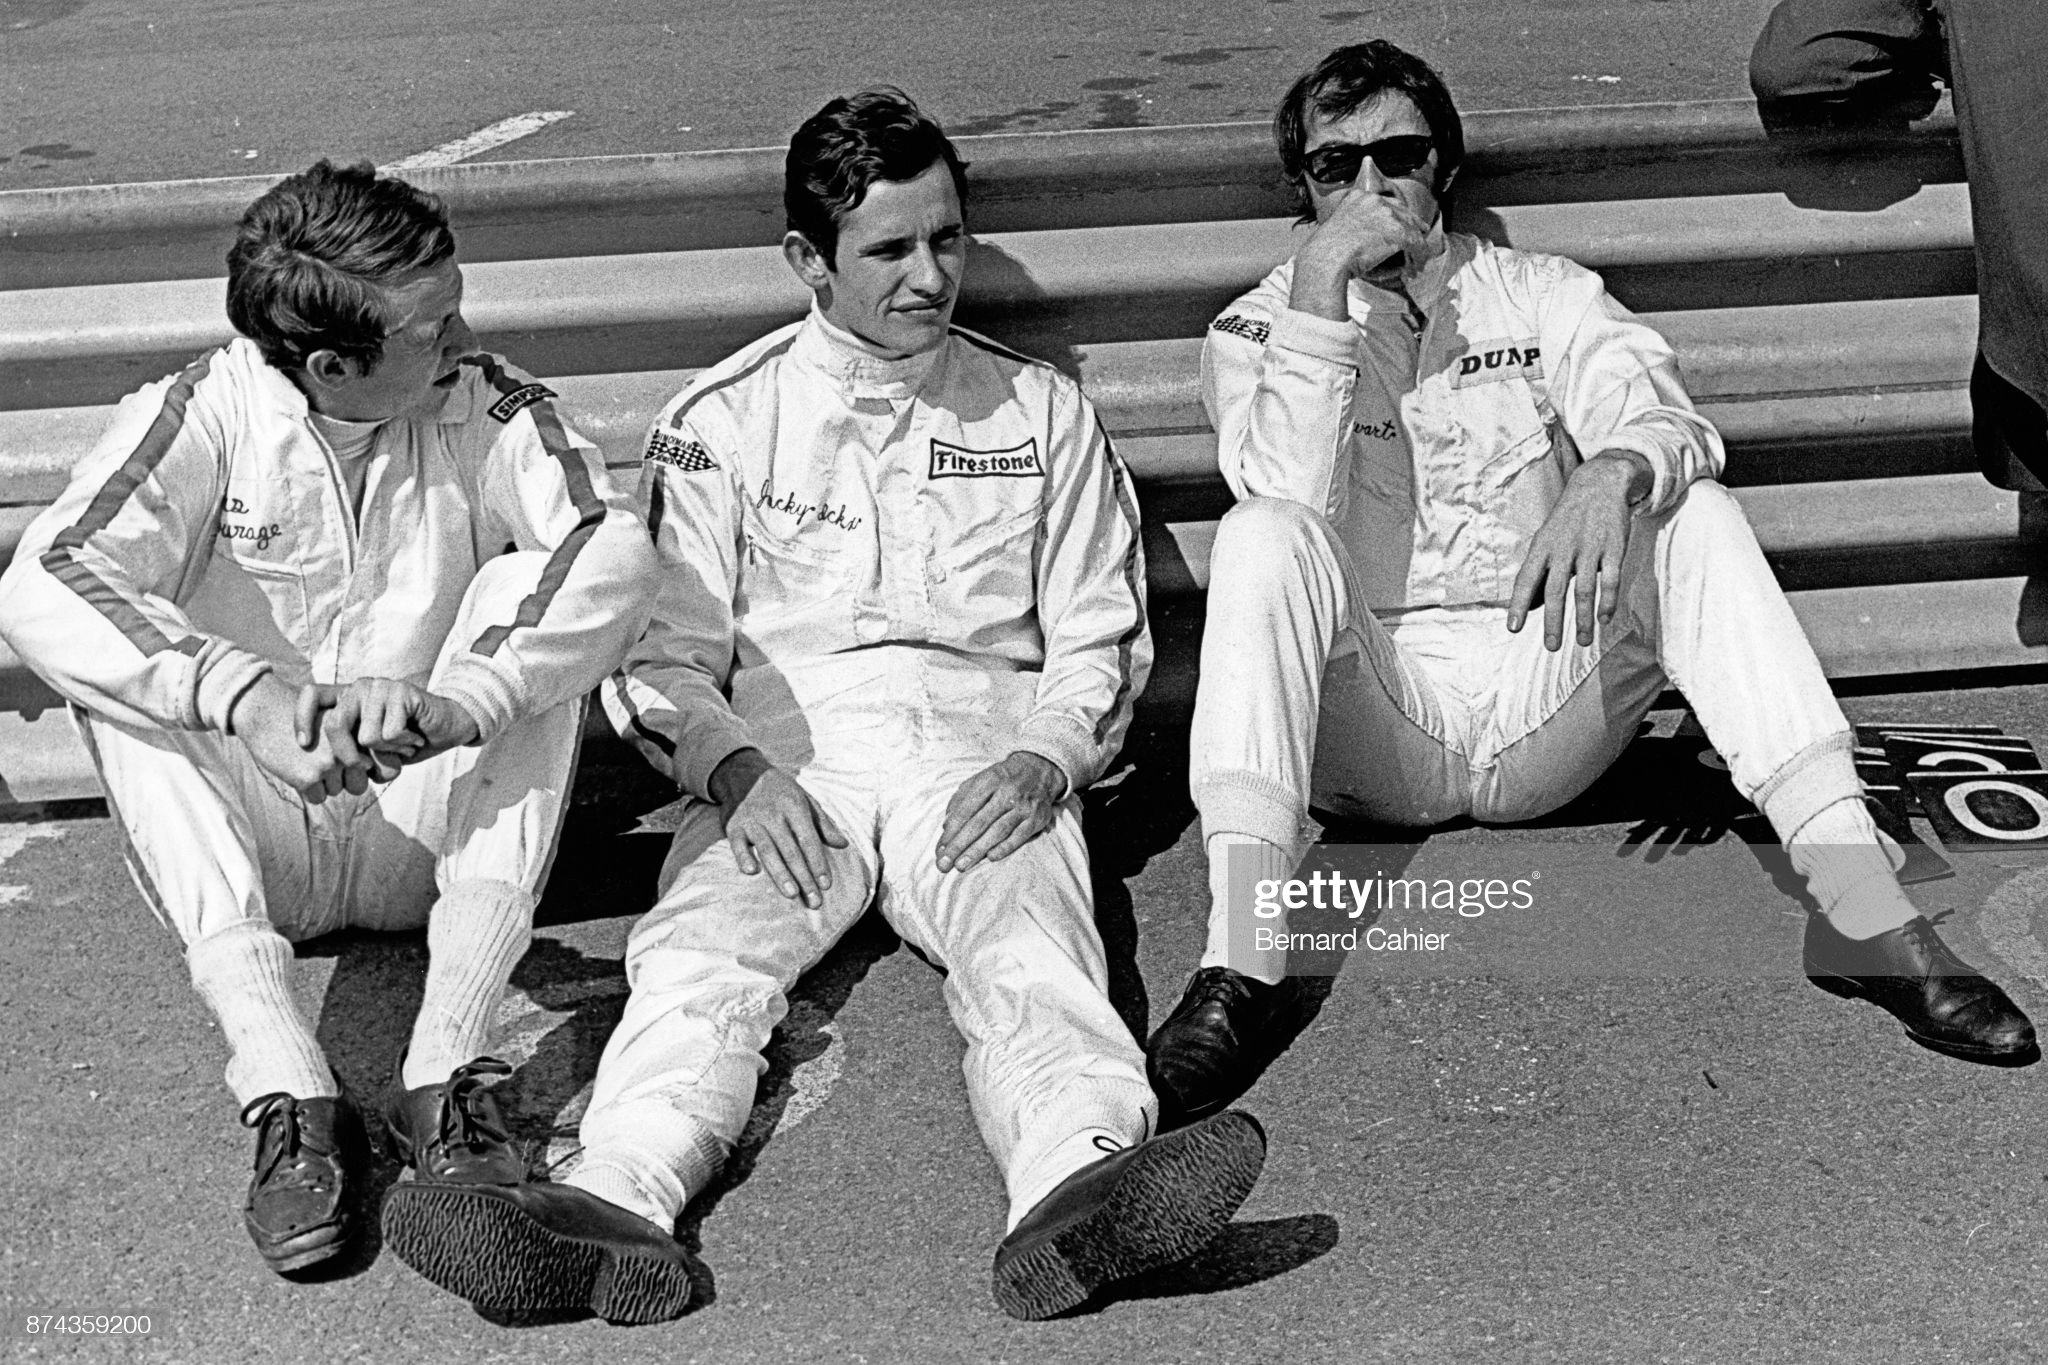 Jacky Ickx, Jackie Stewart and Piers Courage, Grand Prix of Italy, Autodromo Nazionale Monza, 08 September 1968. 